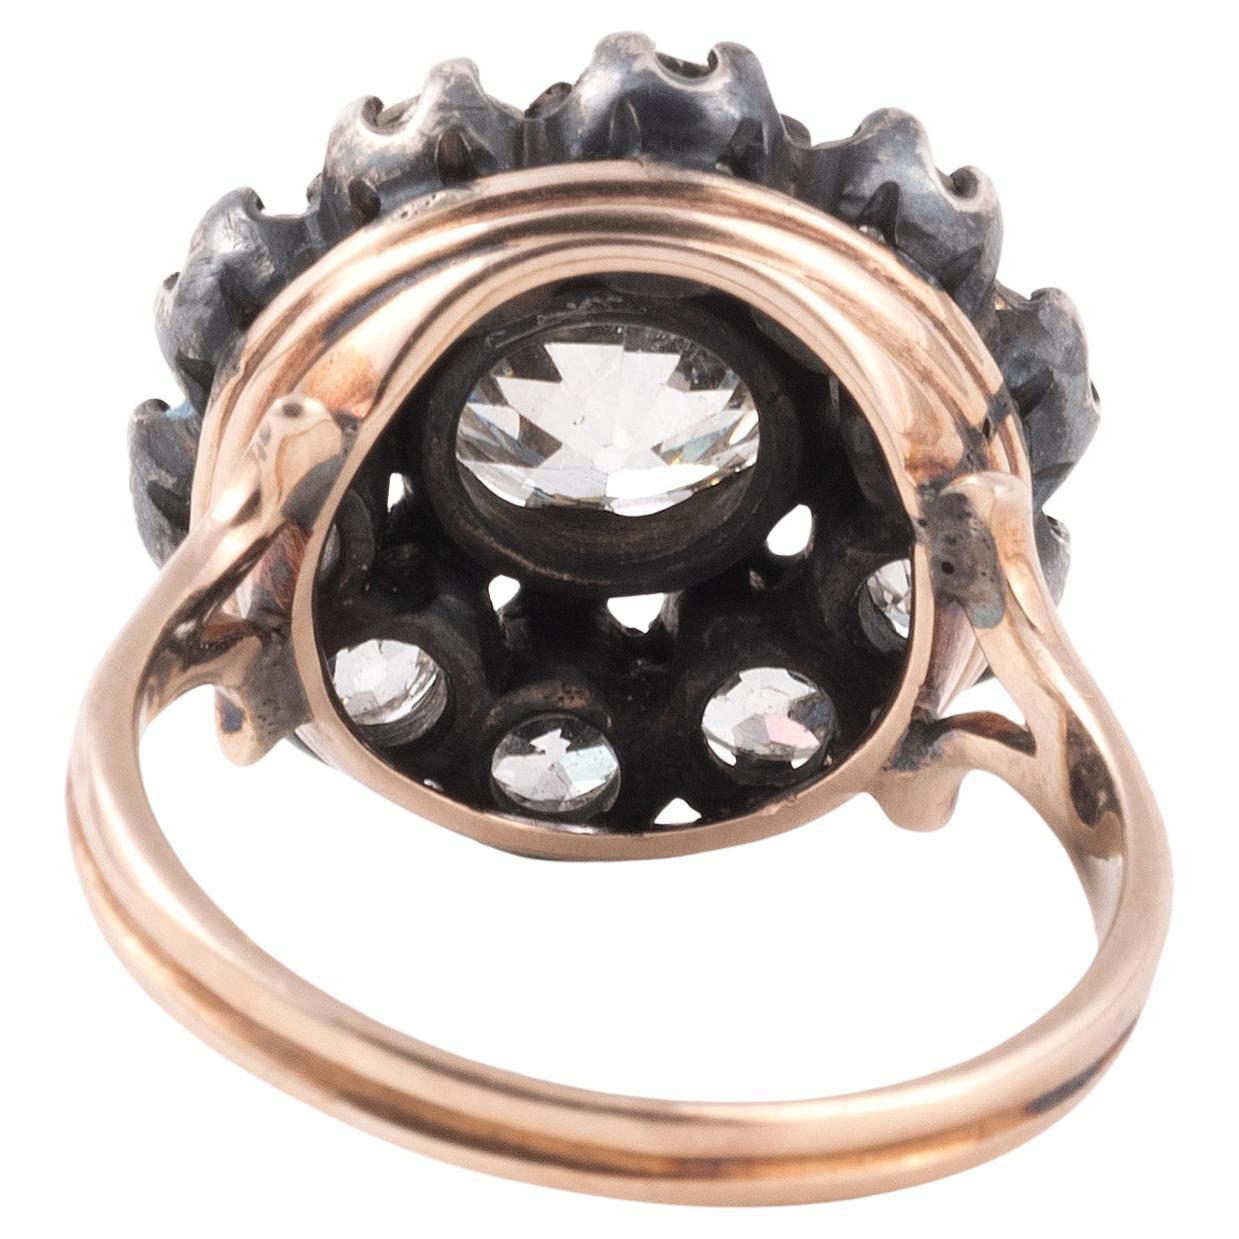 Centering on an old mine-cut diamond within a surround of old cut diamonds with floral motif, mounted in silver and gold, circa 1890
Size/Dimensions: US size 7
Diamond: Approximate total diamond weight of 2.50 carats
Gross Weight: 6.3 grams